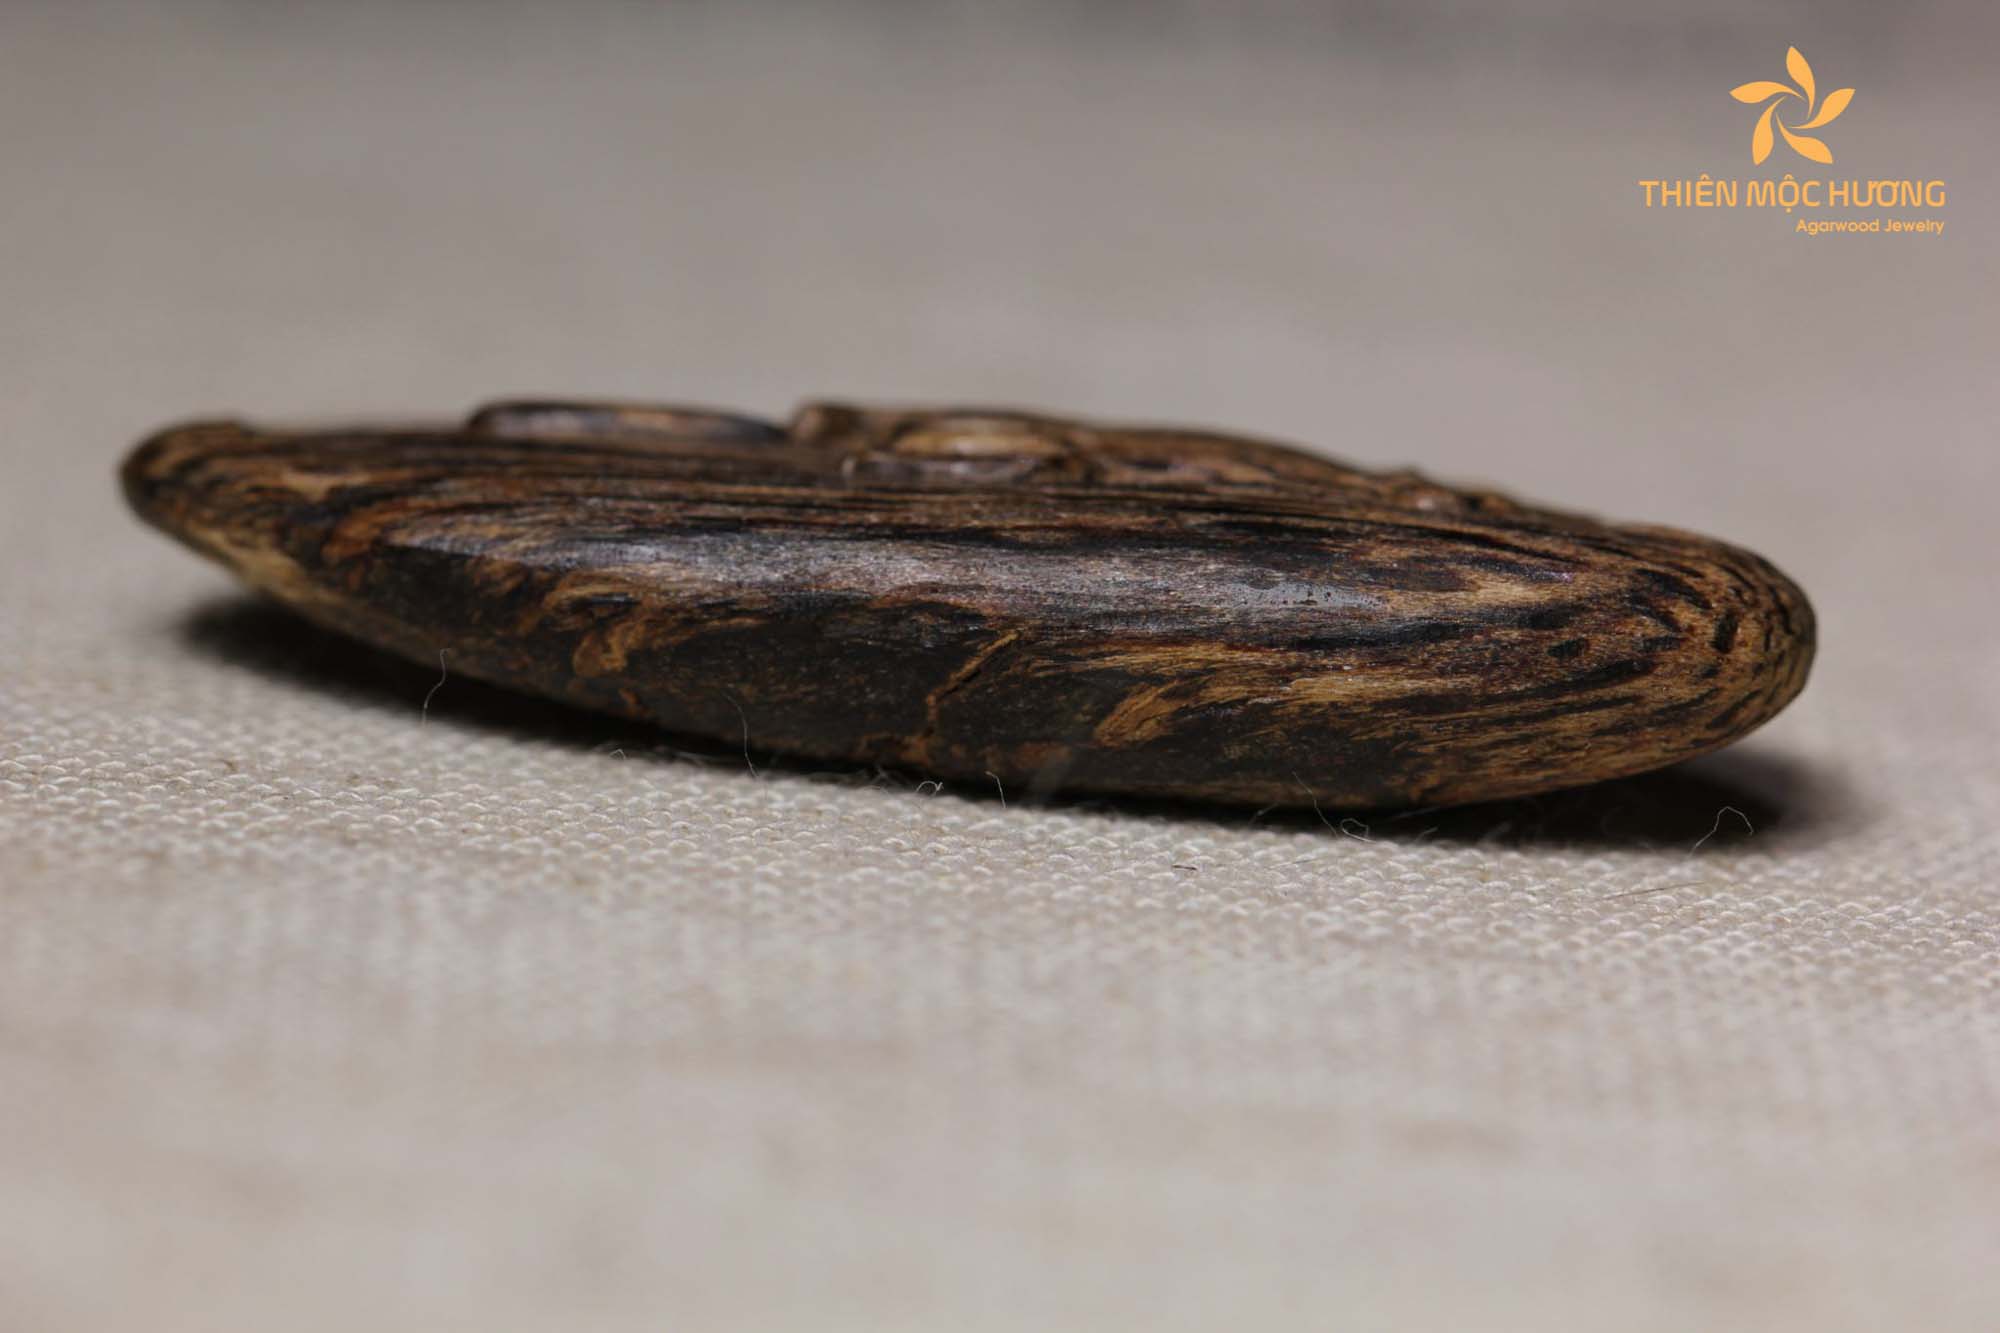 Why is Agarwood a valuable product in China?